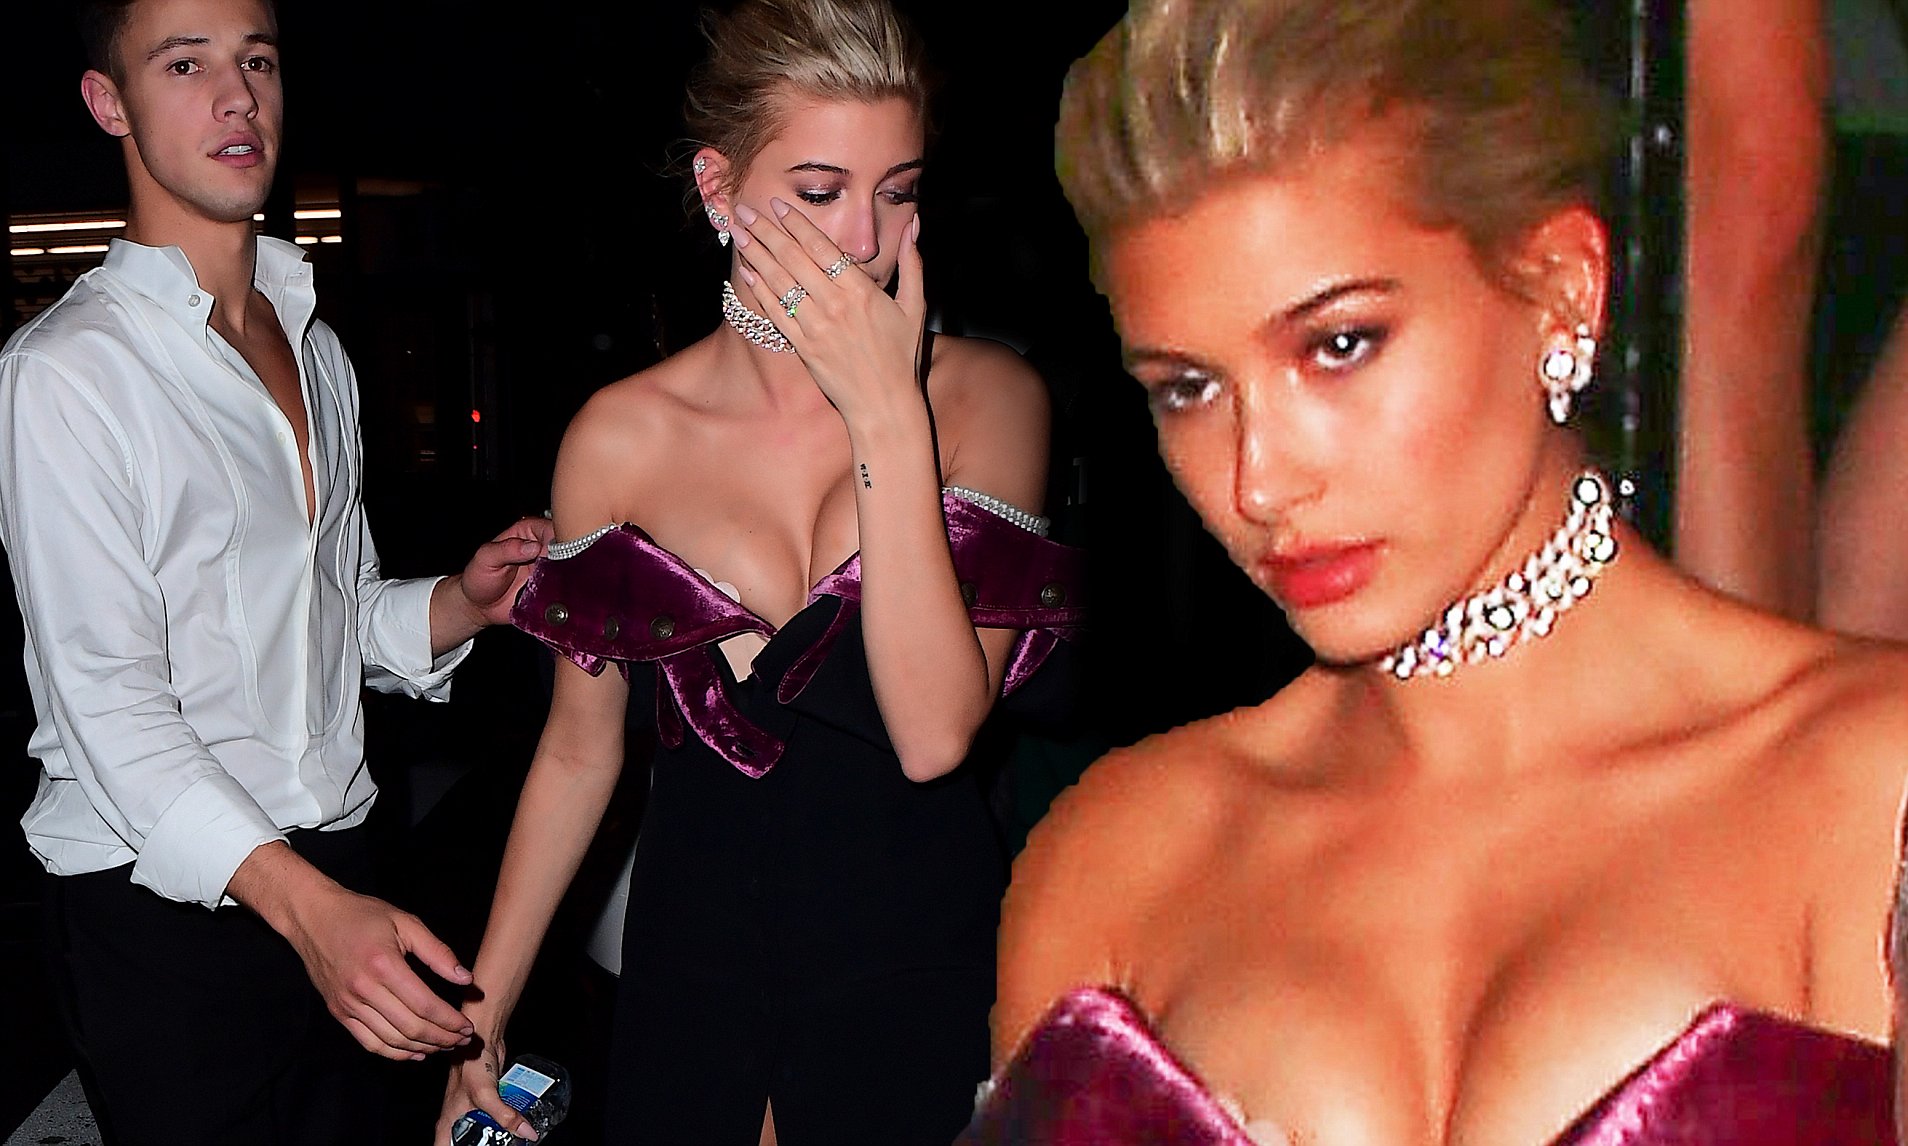 deryck martin recommends hailey baldwin nipples pic